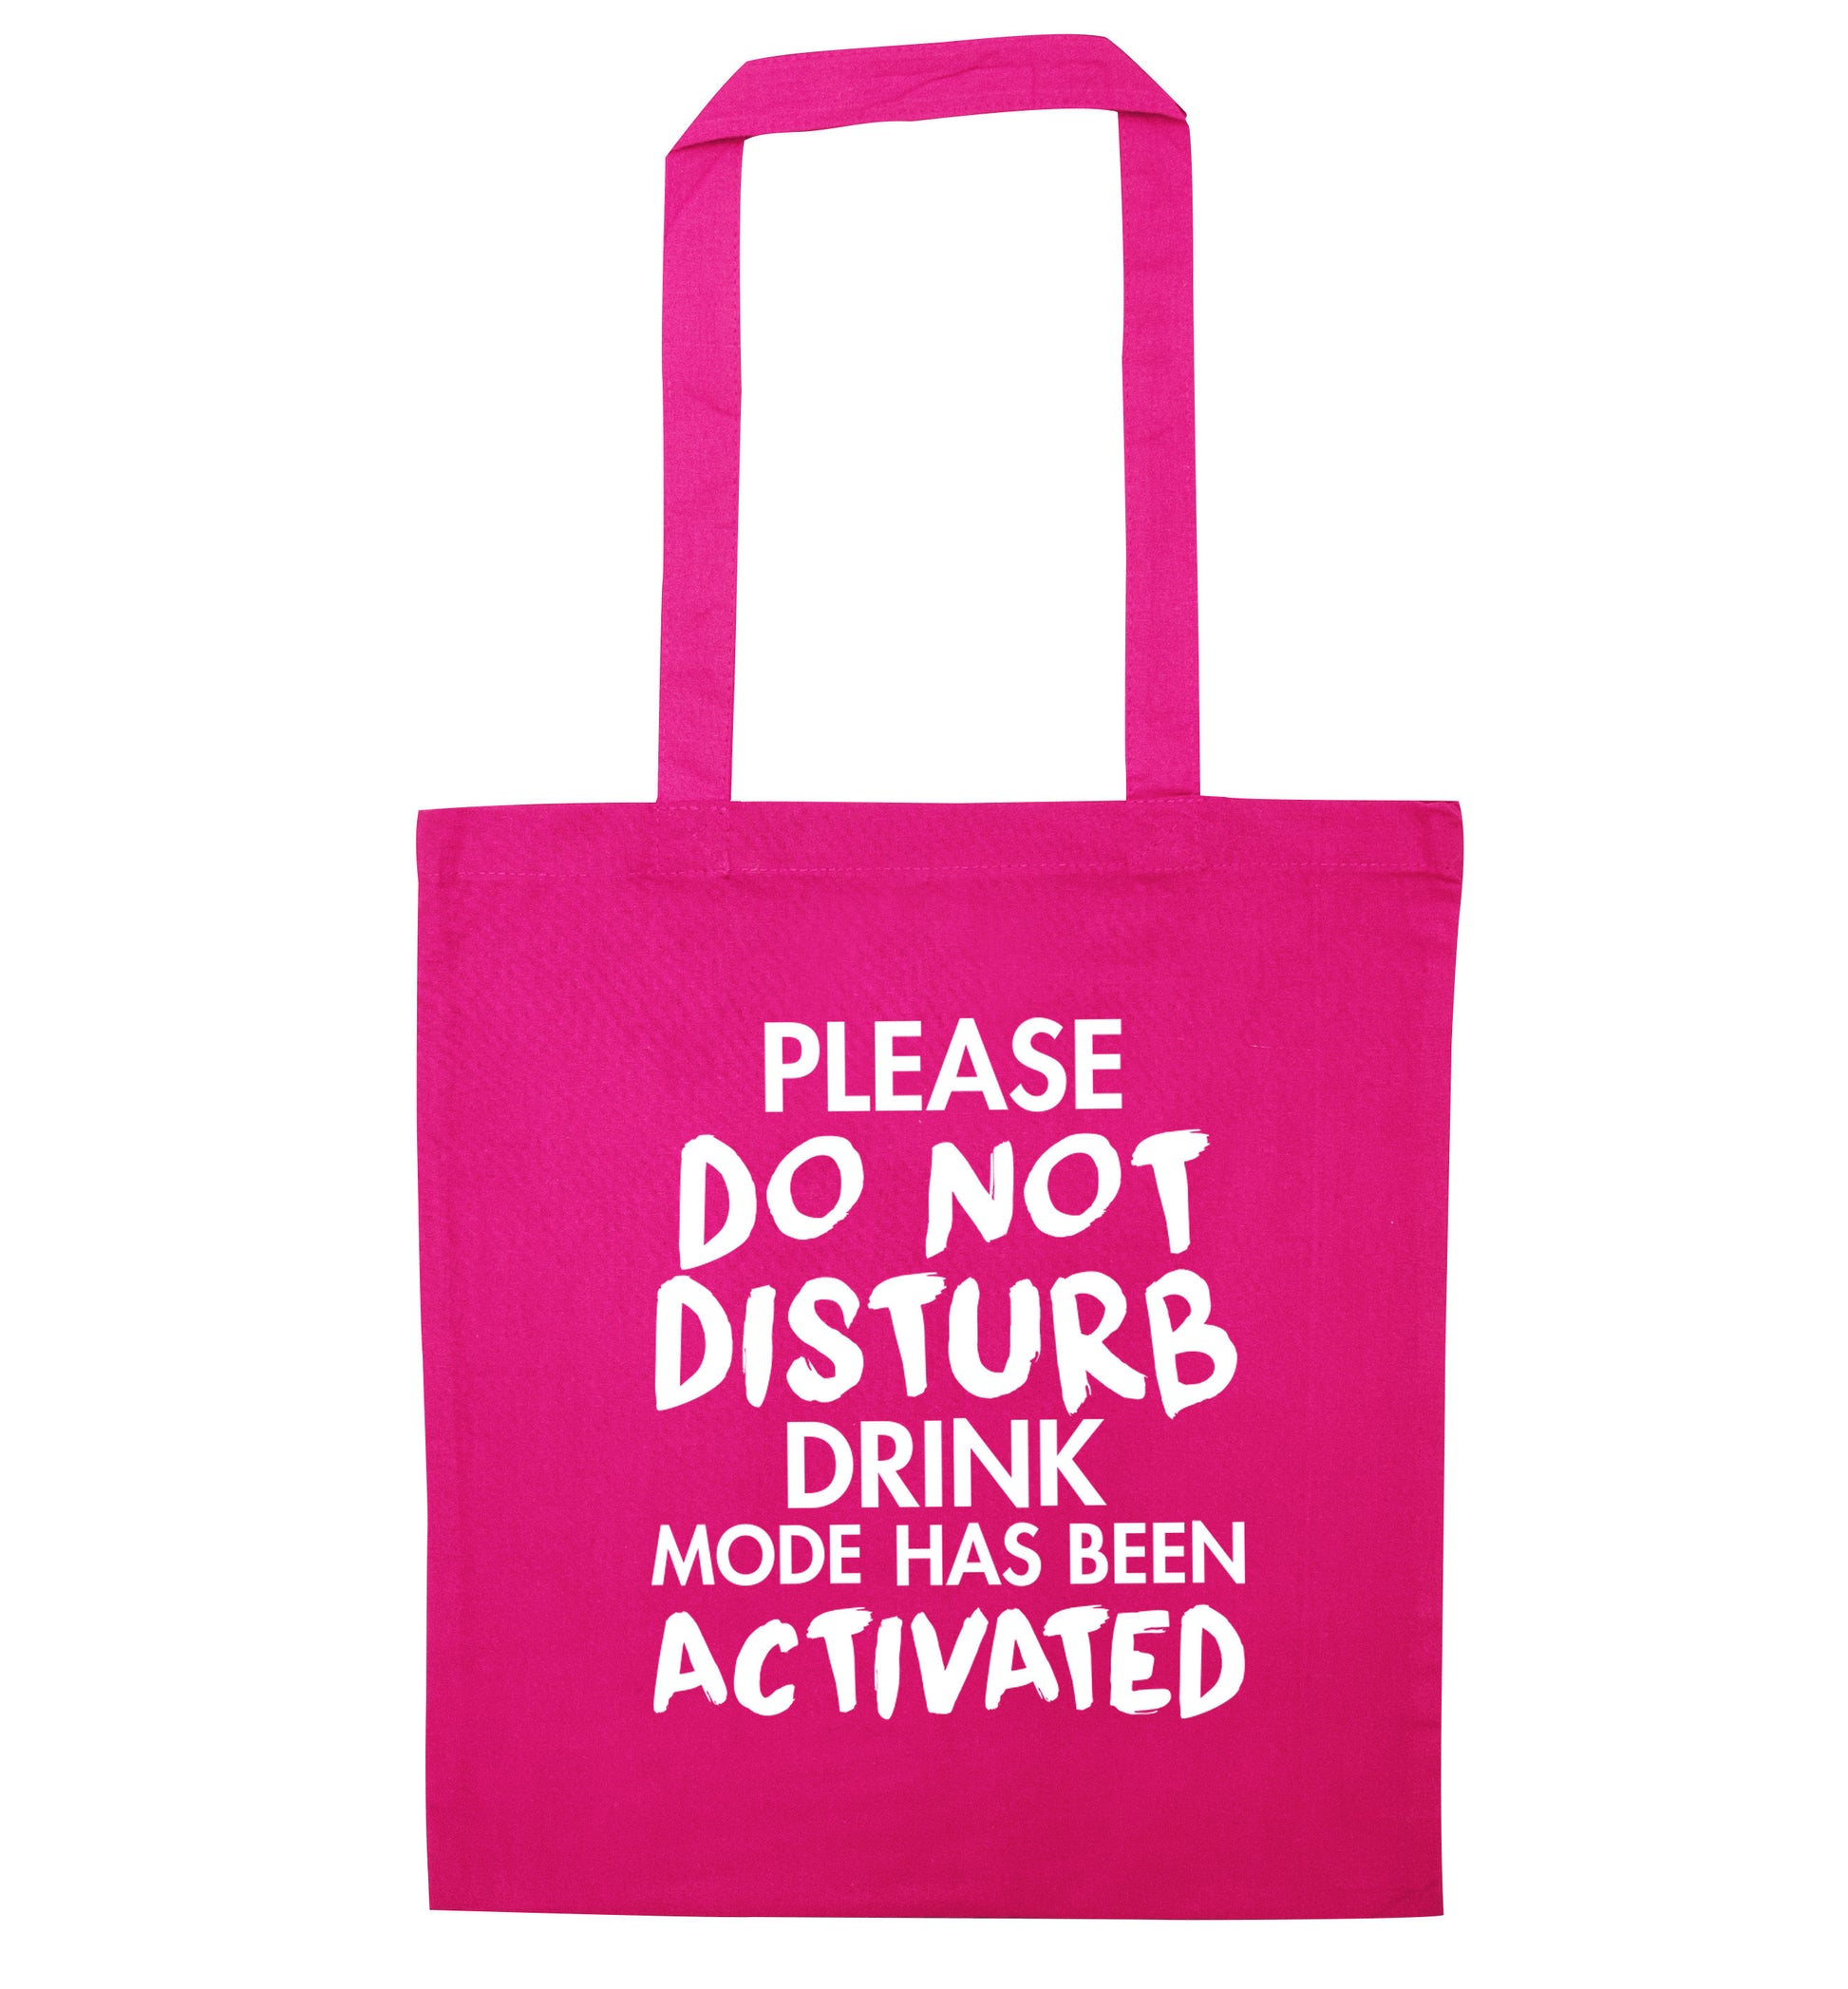 Please do not disturb drink mode has been activated pink tote bag